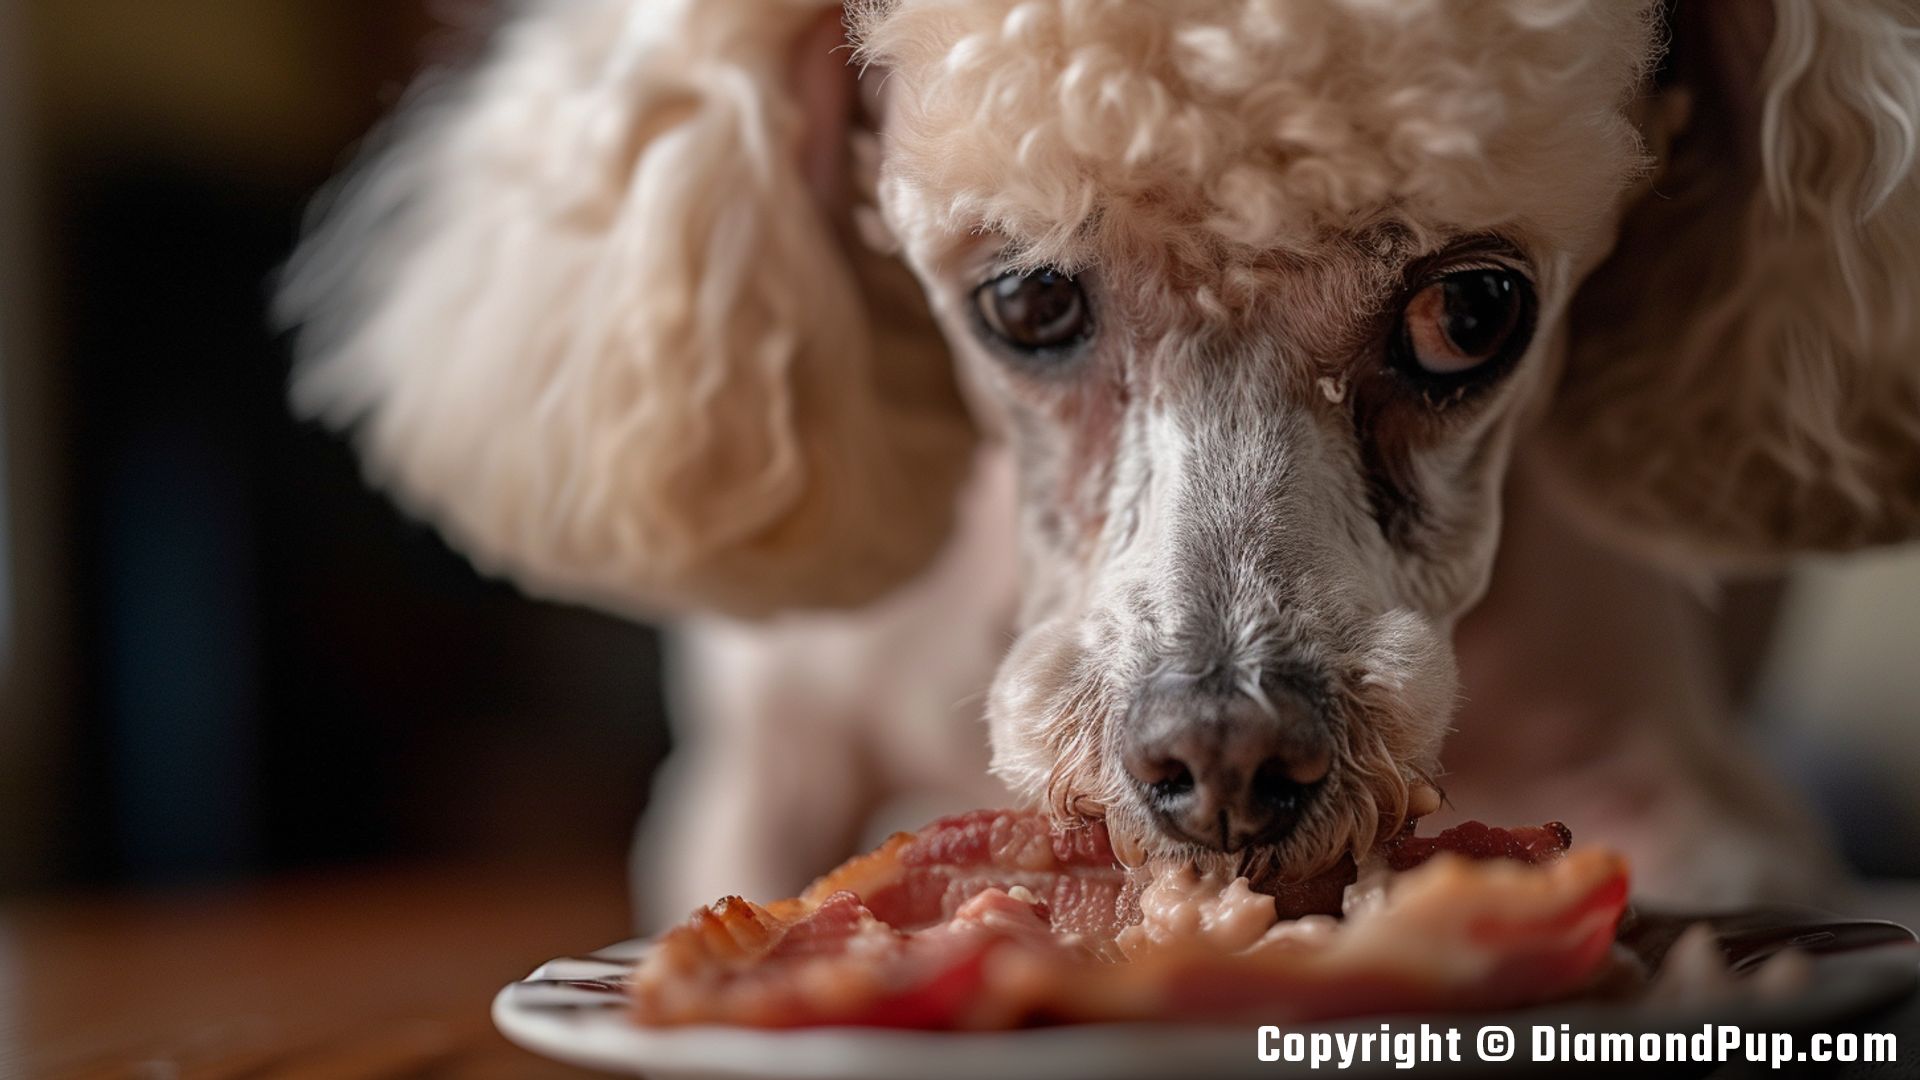 Image of a Playful Poodle Snacking on Bacon